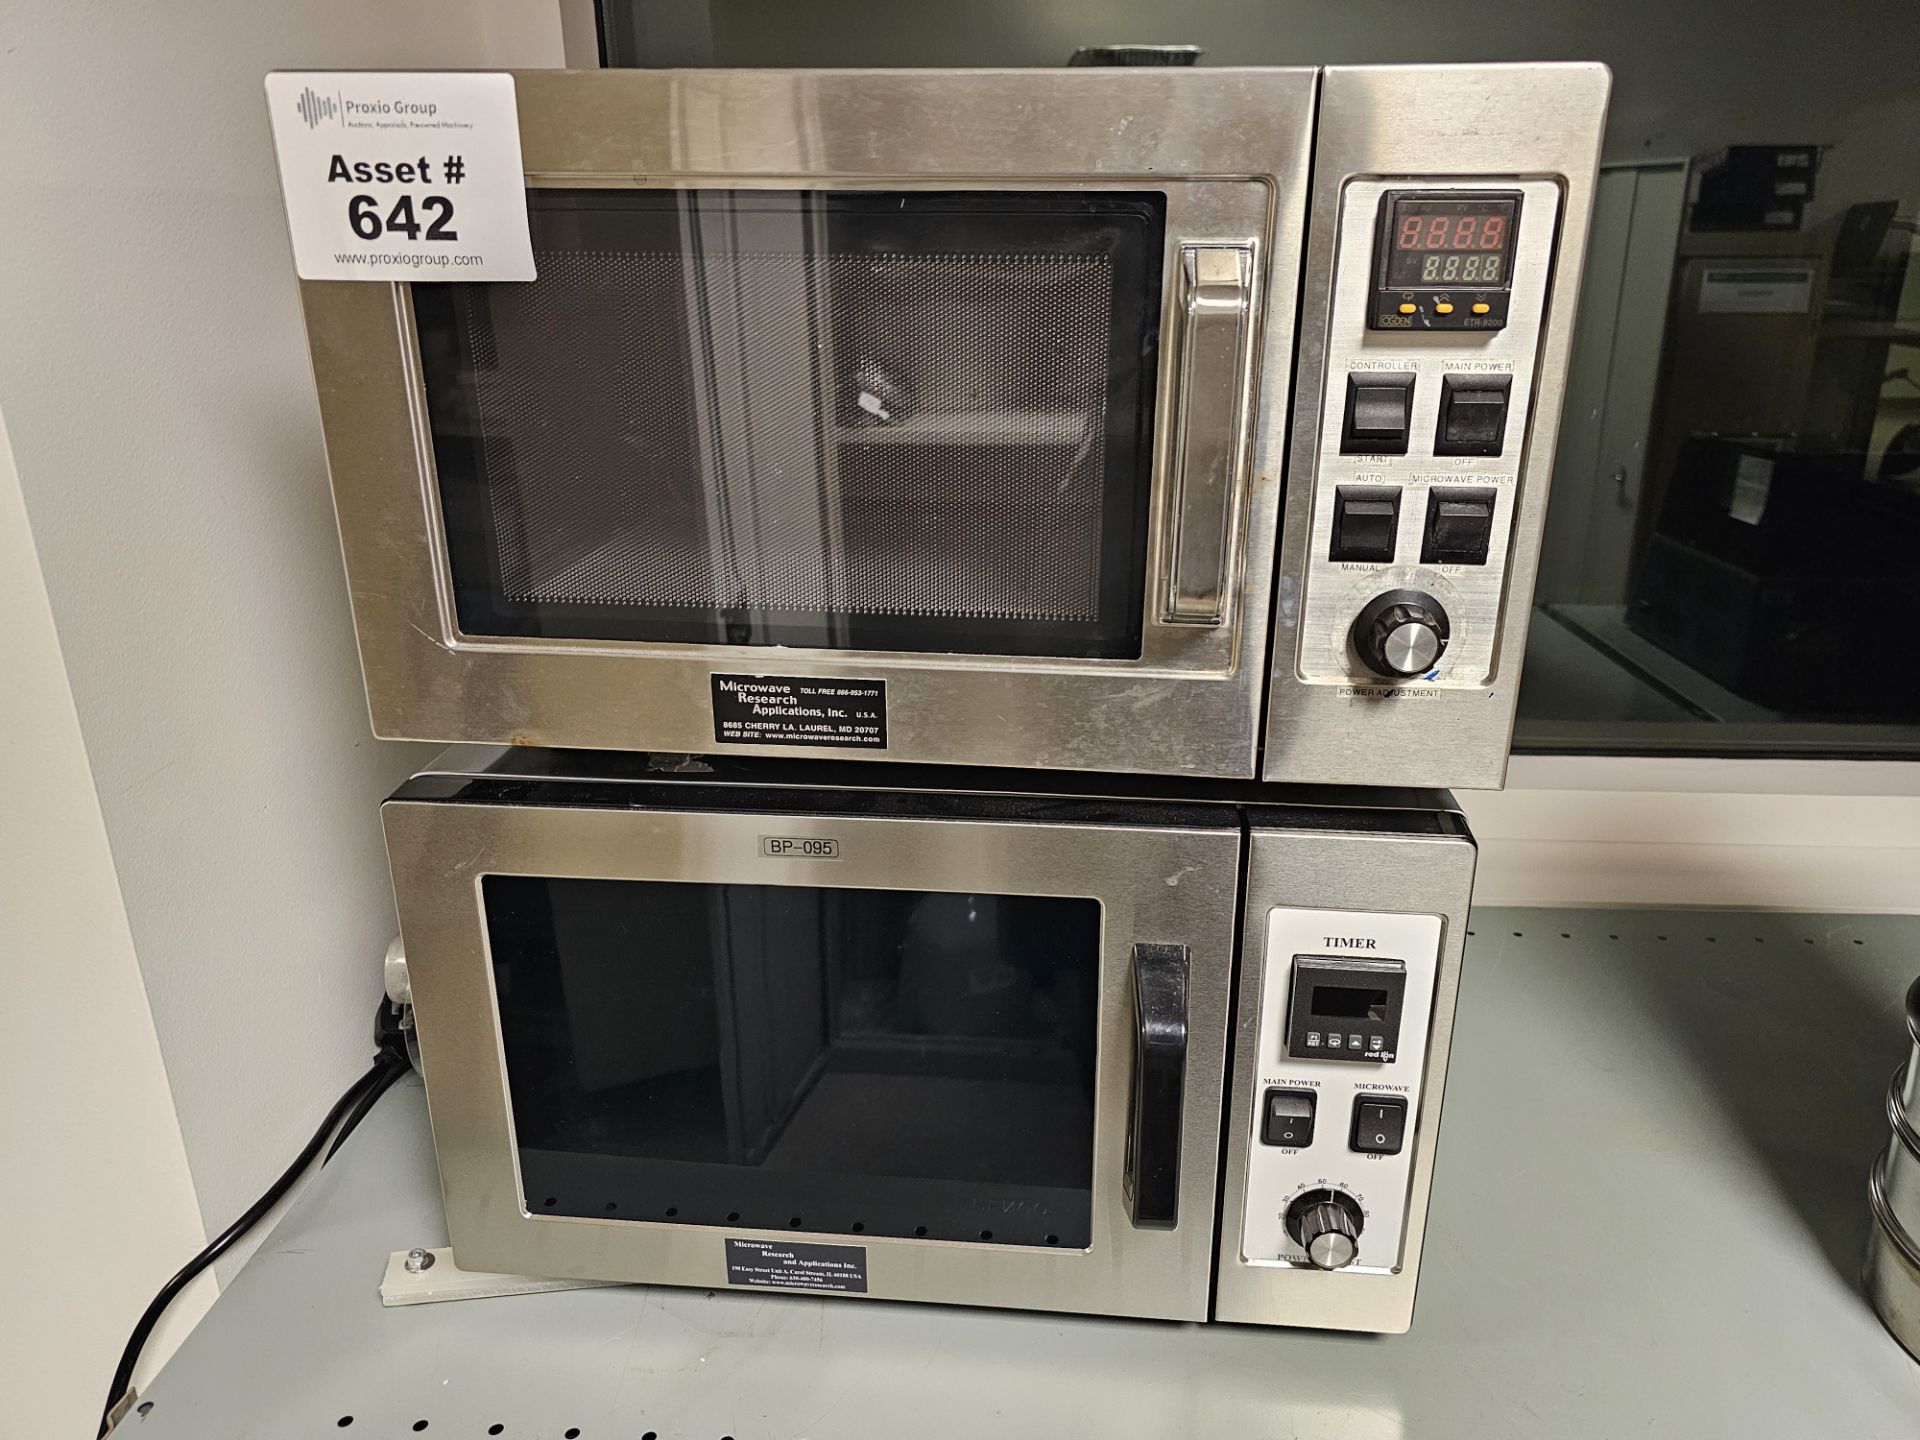 Lot of two Stainless steel microwaves